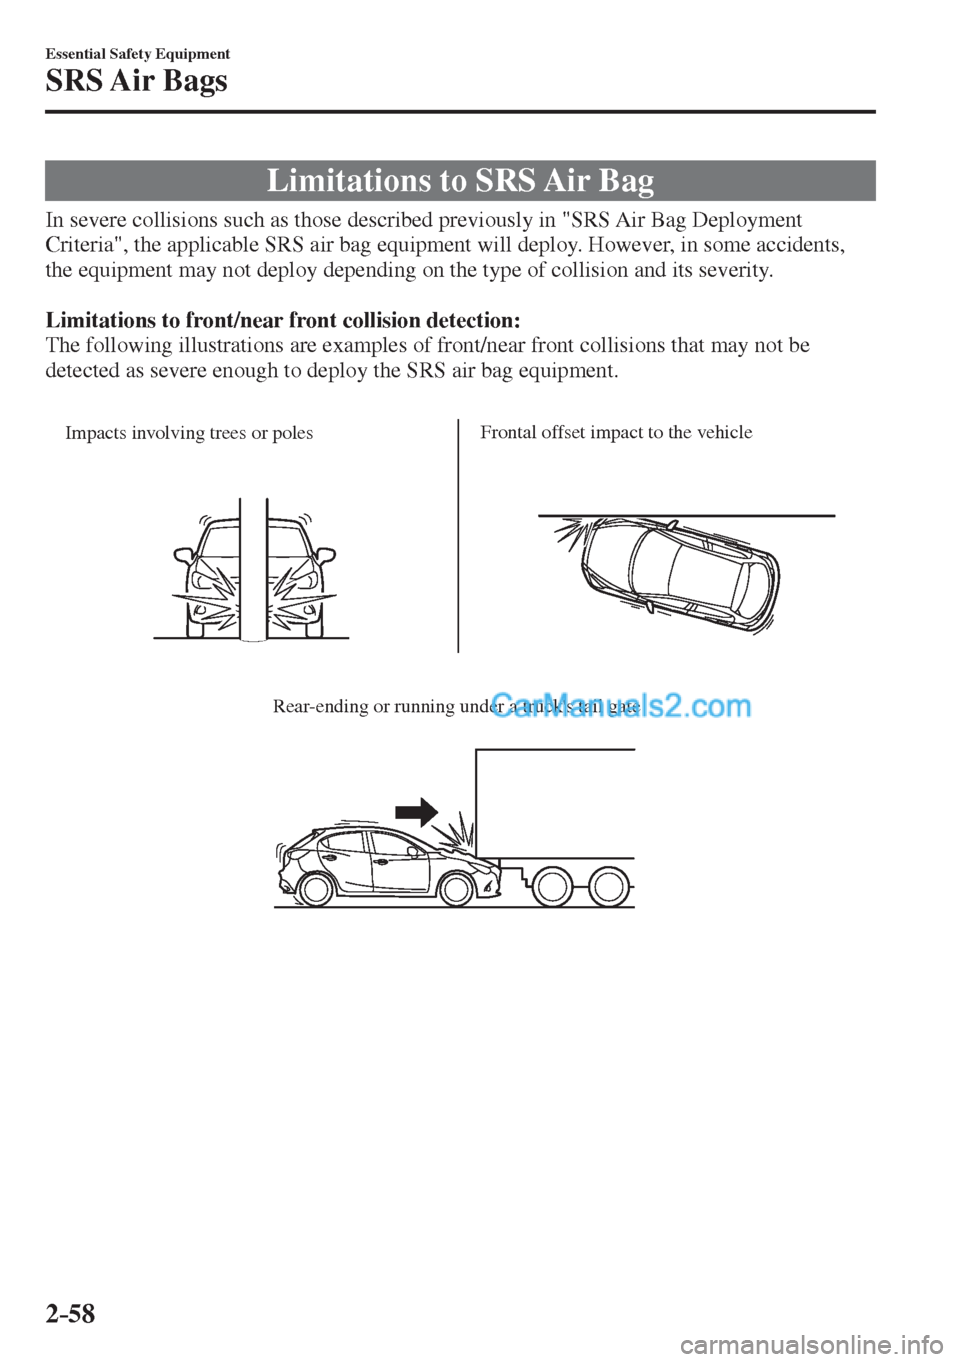 MAZDA MODEL 2 2017   (in English) Manual PDF 2–58
Essential Safety Equipment
SRS Air  Bags
 Limitations to SRS Air Bag
            In  severe  collisions  such  as  those  described  previously  in  "SRS  Air  Bag  Deployment 
Criteria", the a